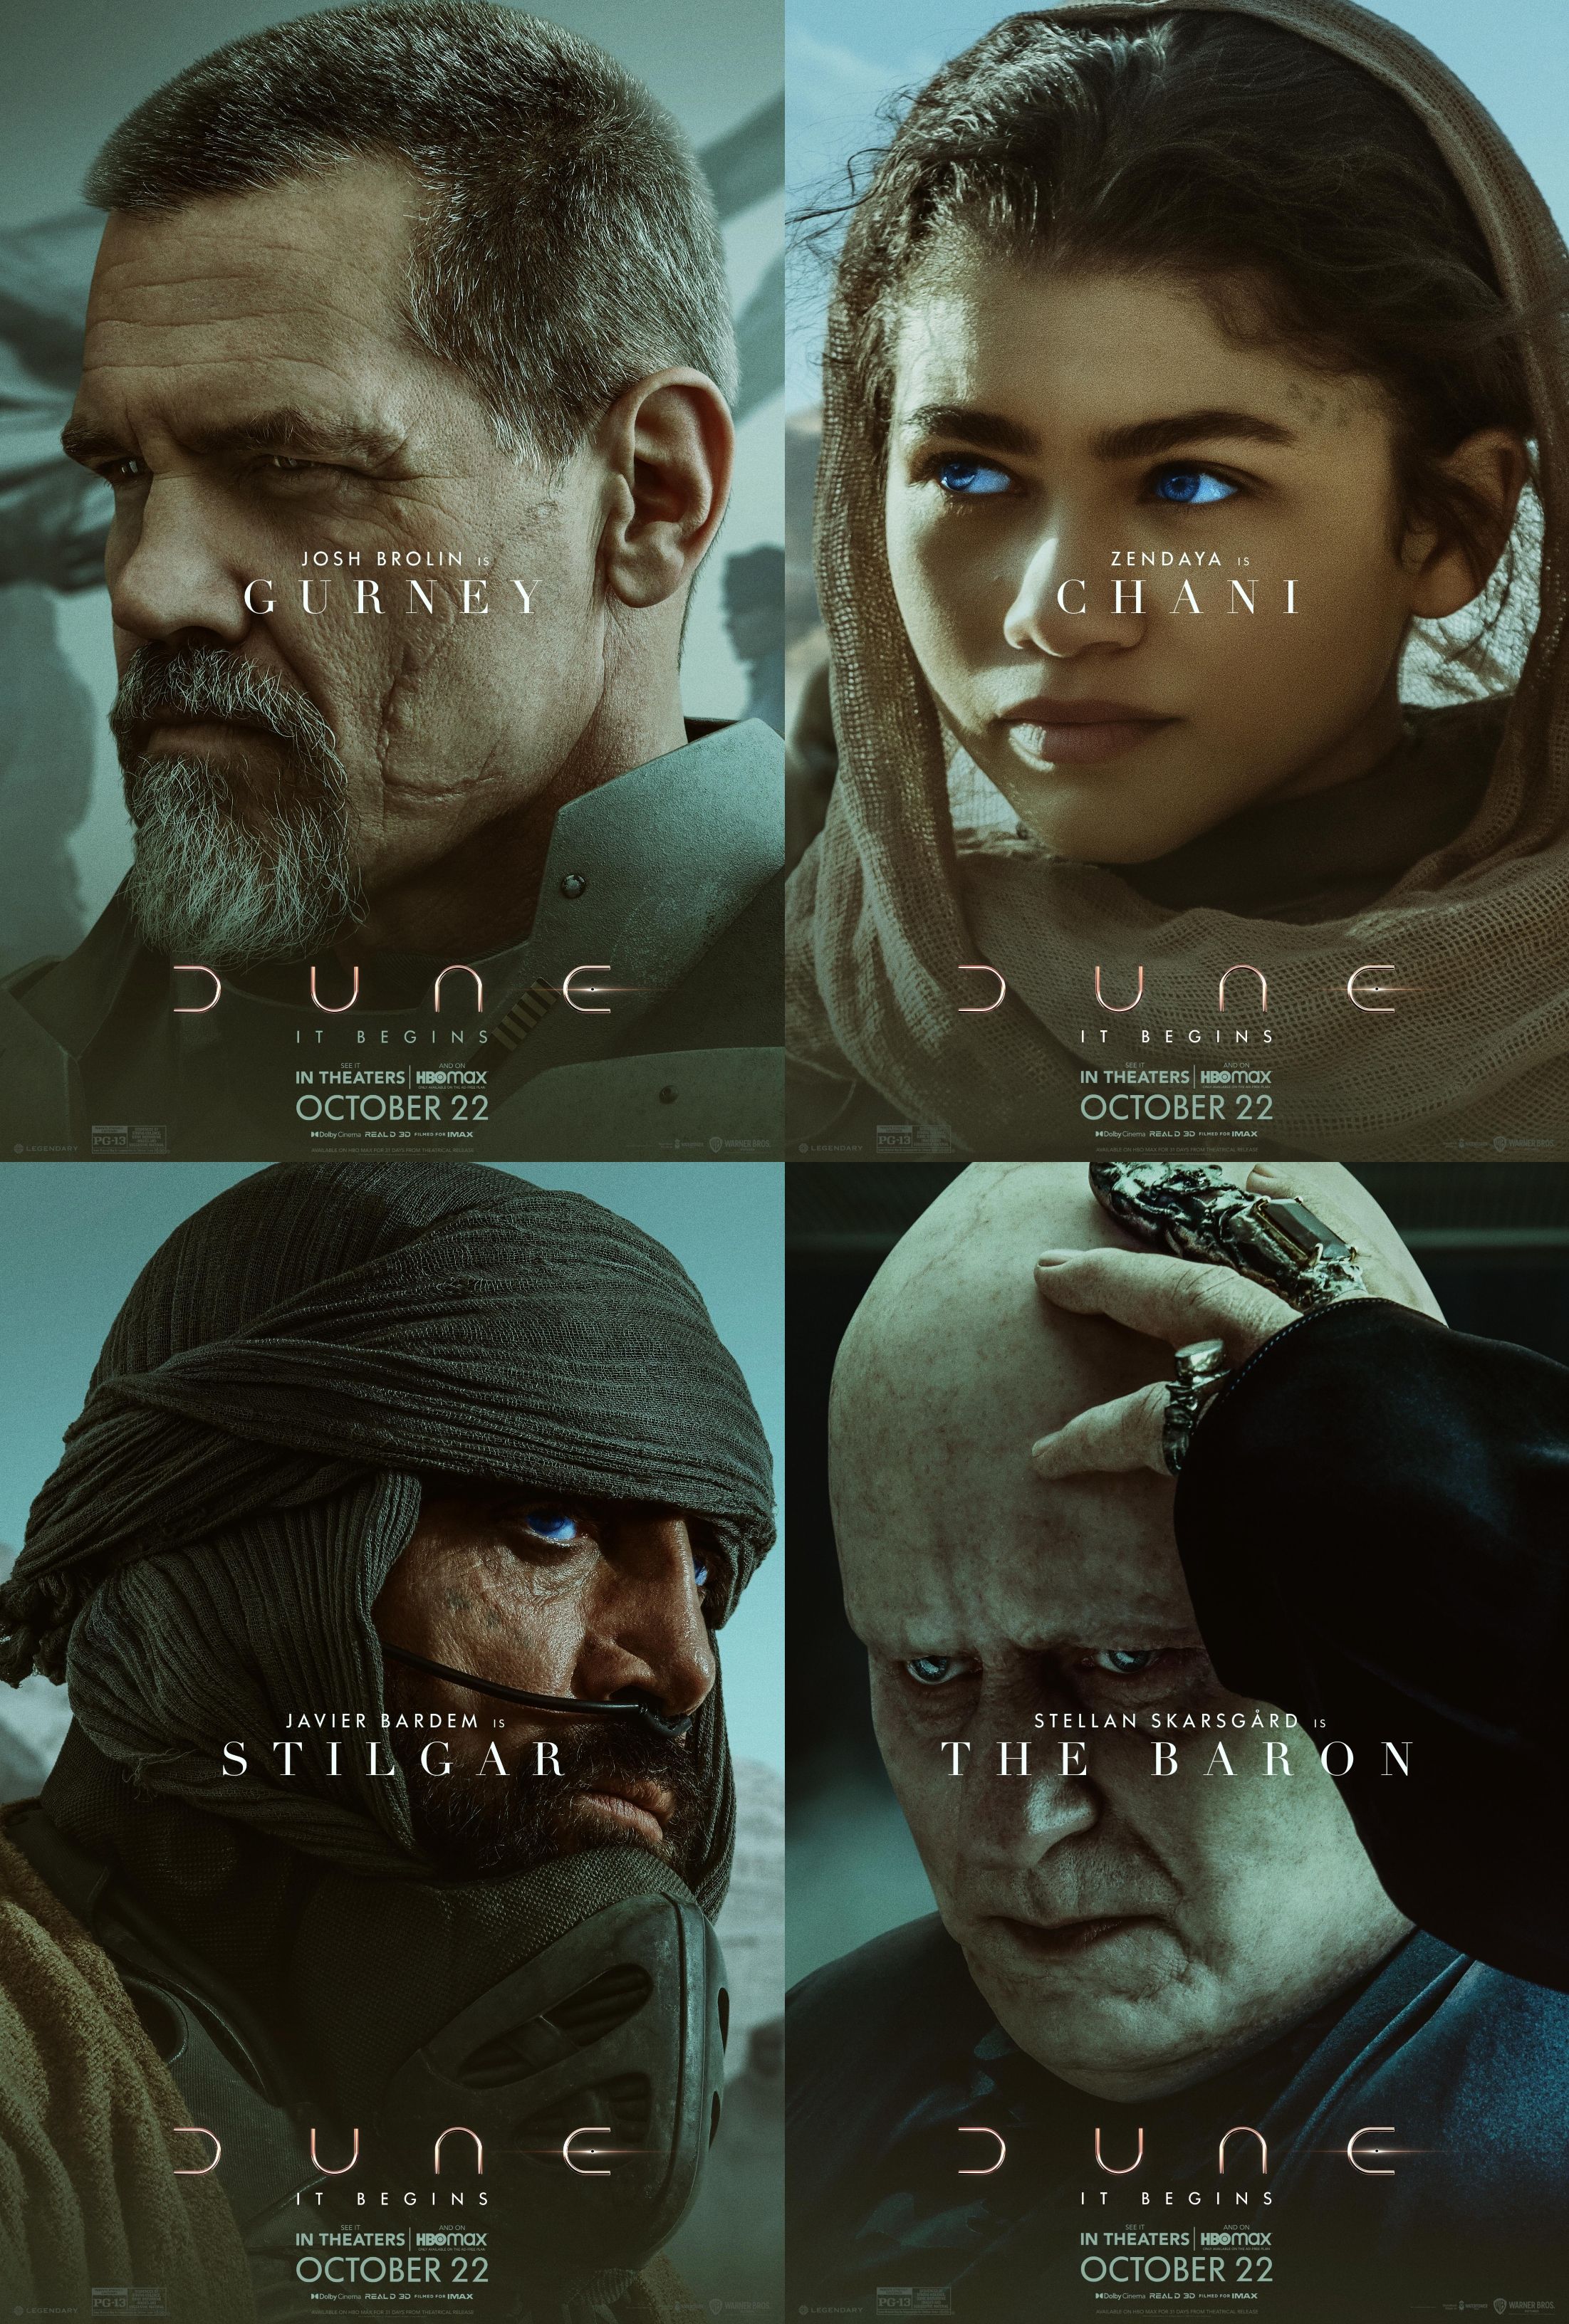 Dune character posters #2